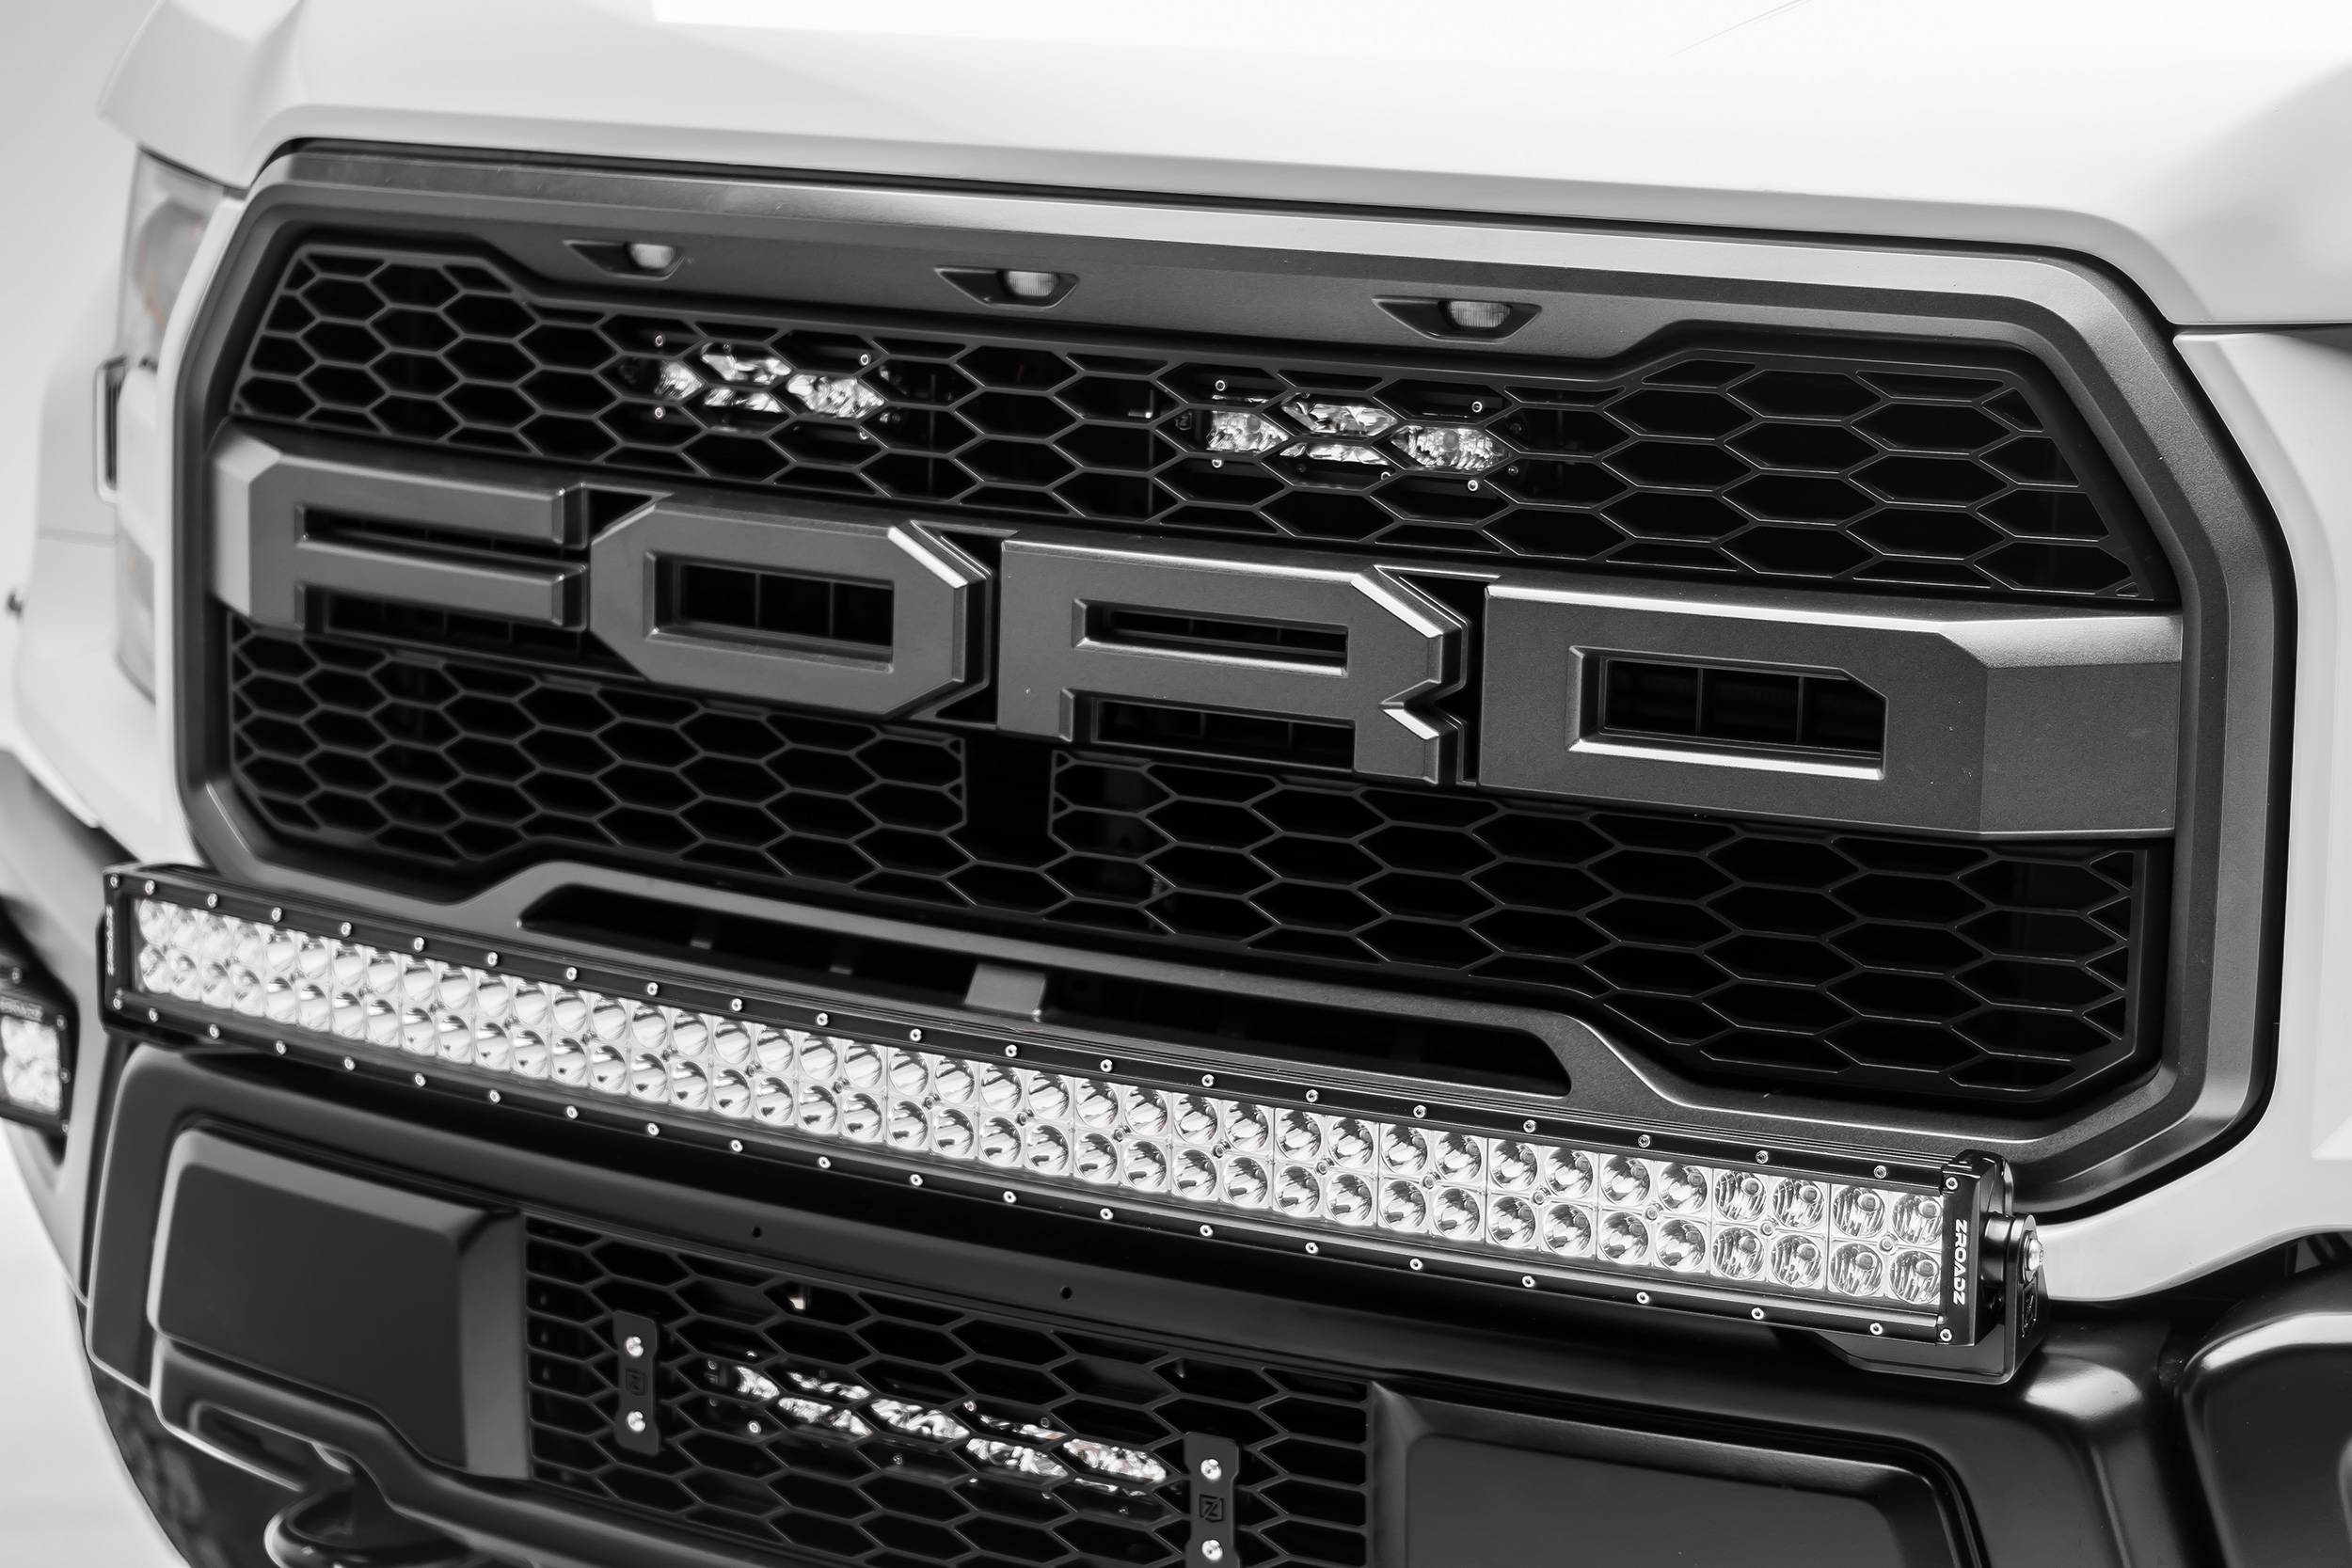 ZROADZ OFF ROAD PRODUCTS - 2017-2021 Ford F-150 Raptor OEM Grille LED Kit with (2) 6 Inch LED Straight Single Row Slim Light Bars - PN #Z415651-KIT